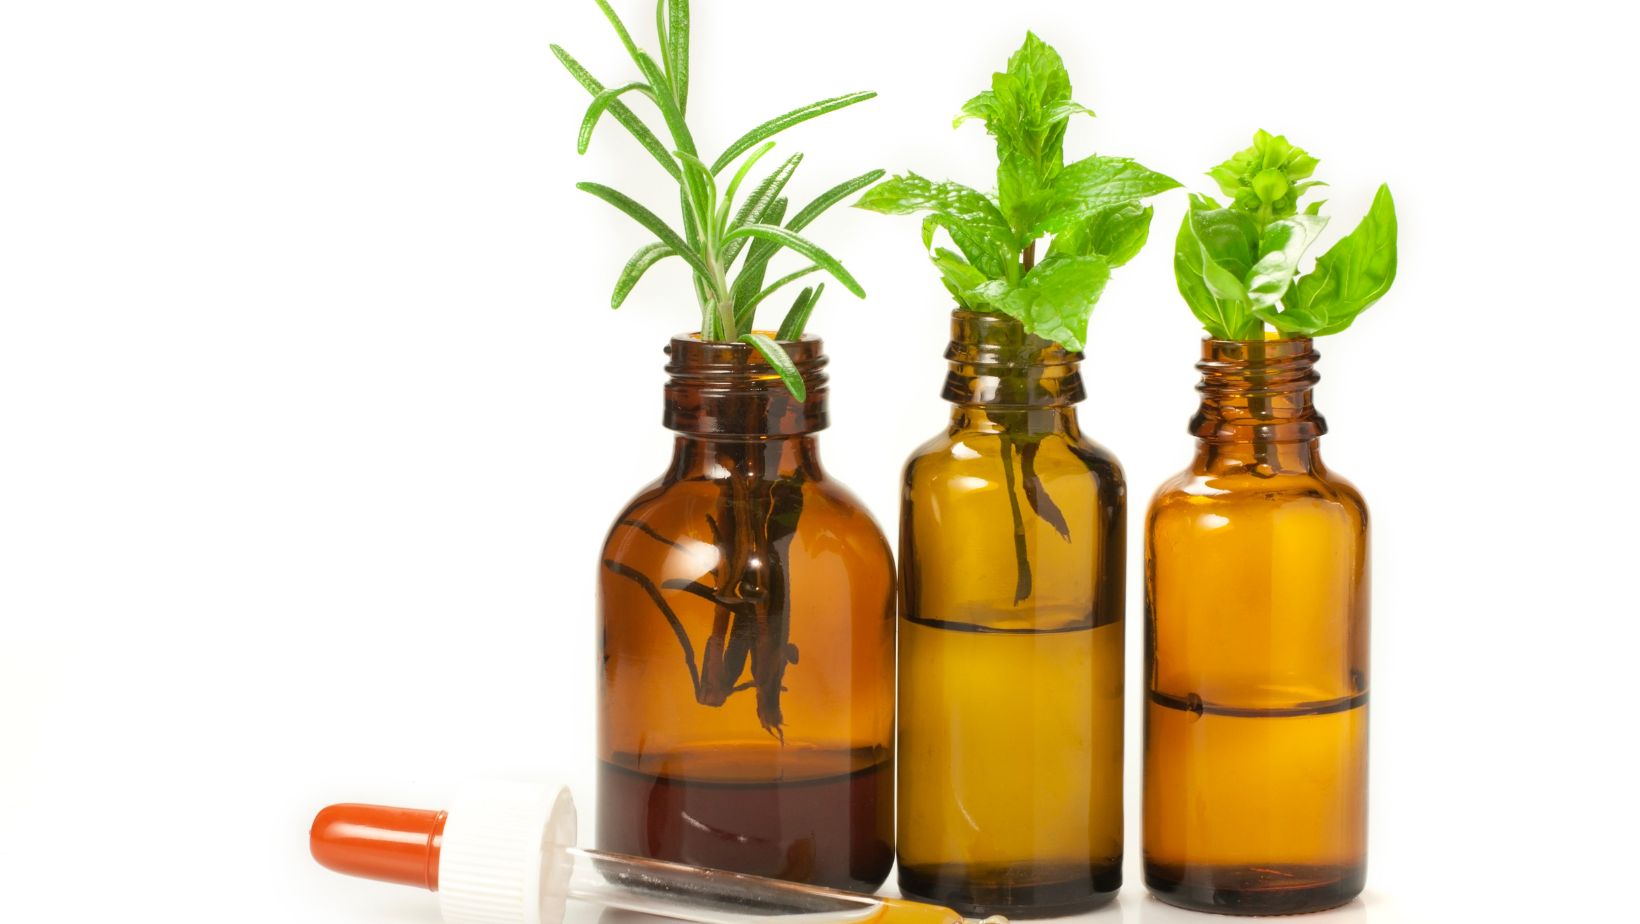 natural remedies are usually more effective and safer because they are thoroughly tested.